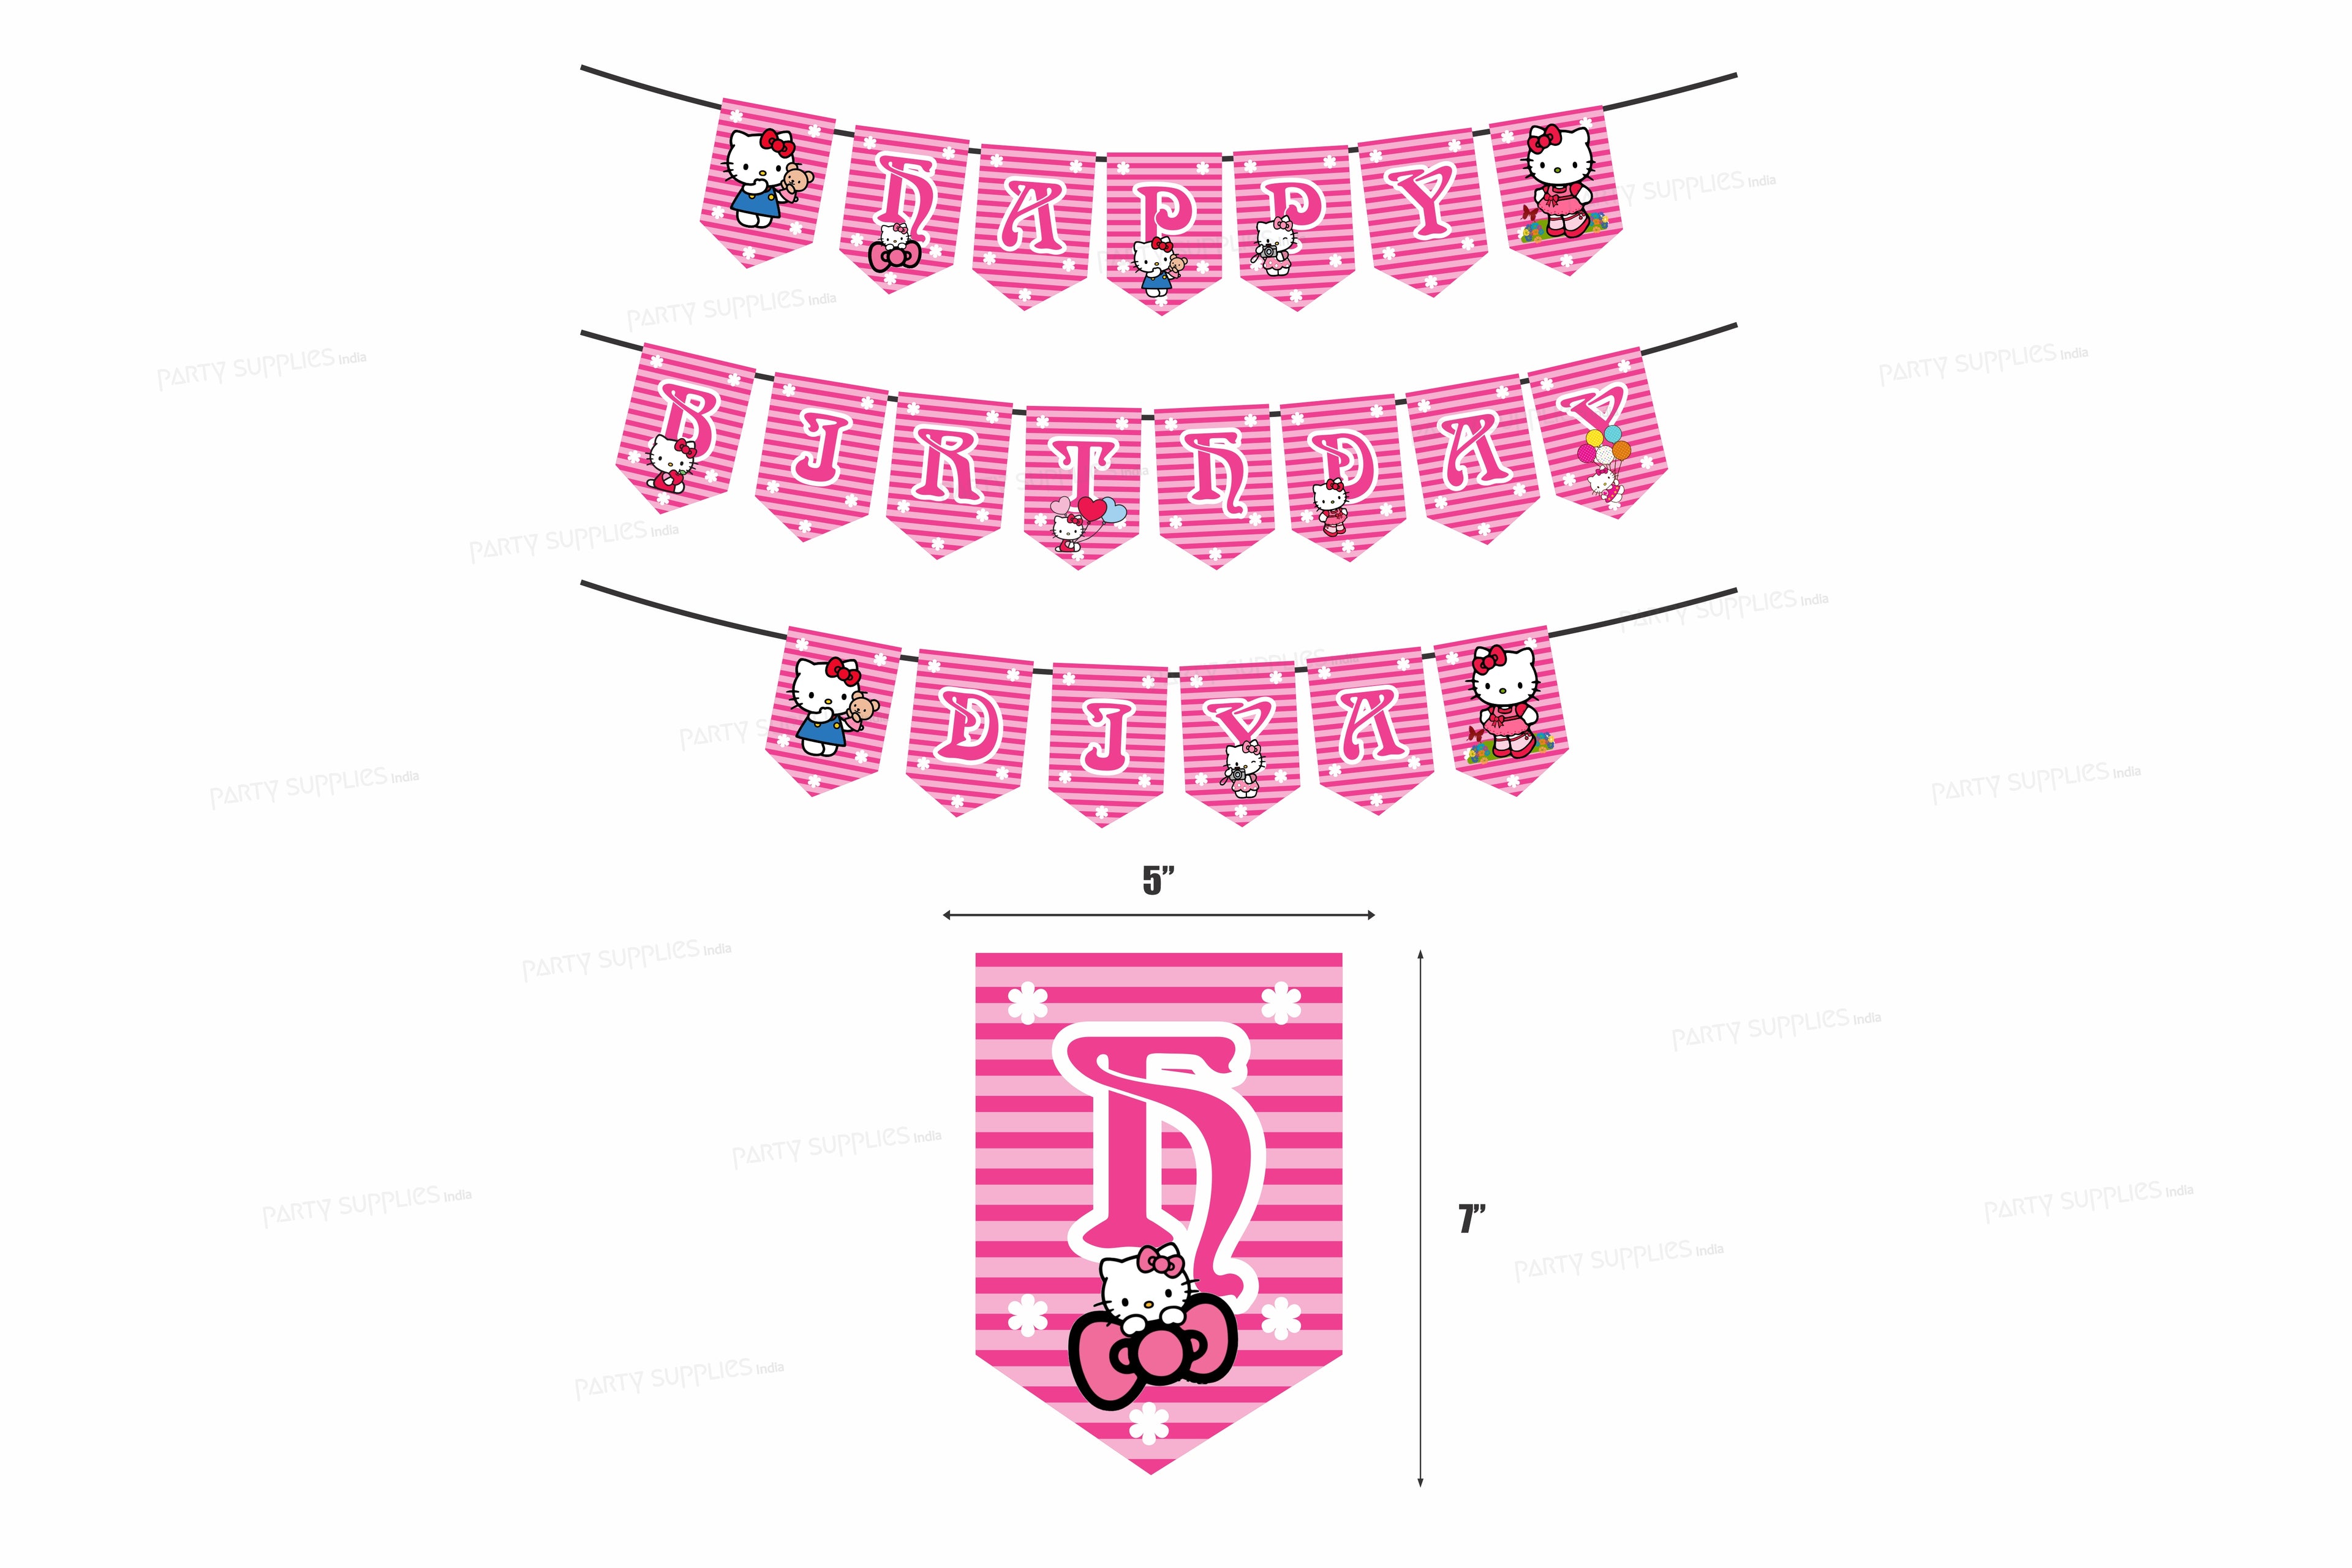 PSI Hello Kitty Theme Personalized Hanging